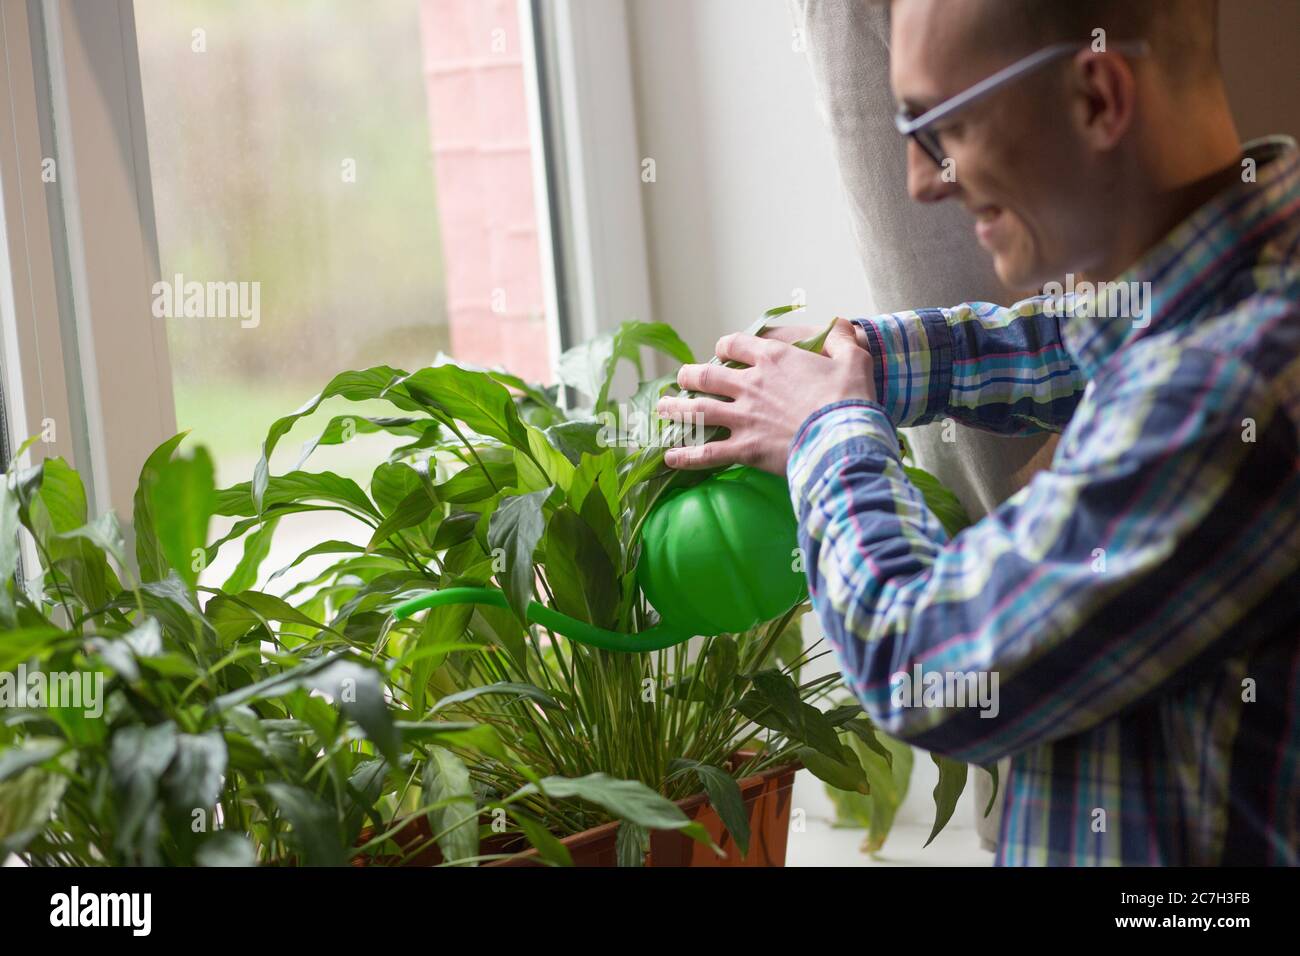 Freelancer taking care of home plants at working space at home. Man watering flowers from plastic watering can standing by window in sunny day. Side Stock Photo